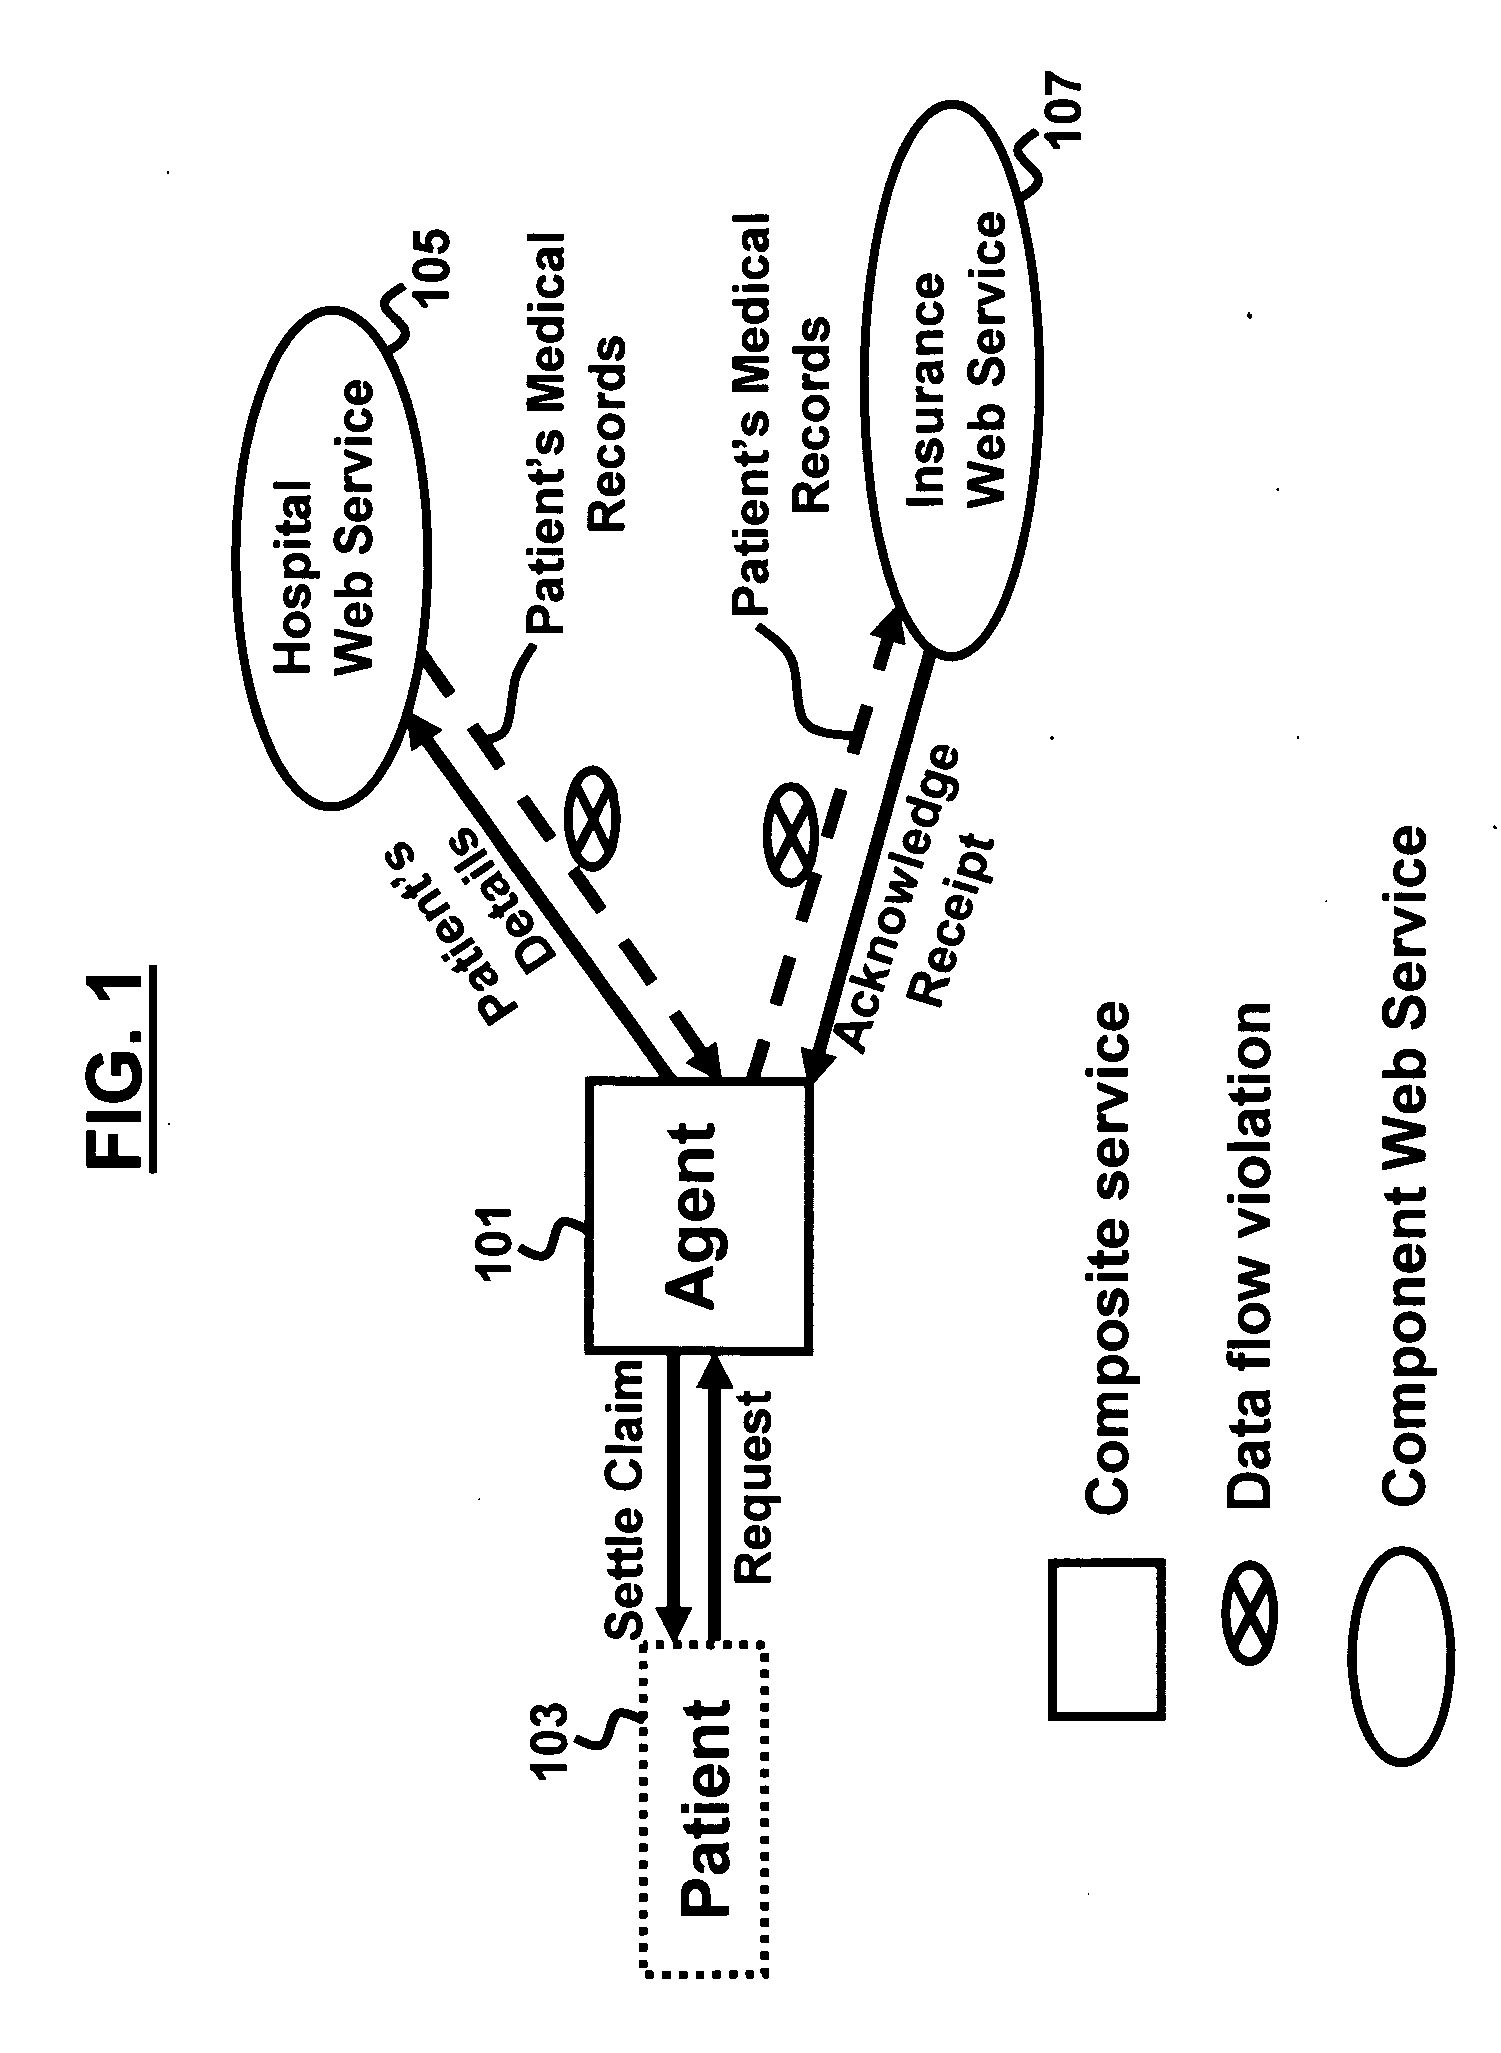 System and method for orchestrating composite web services in constrained data flow environments